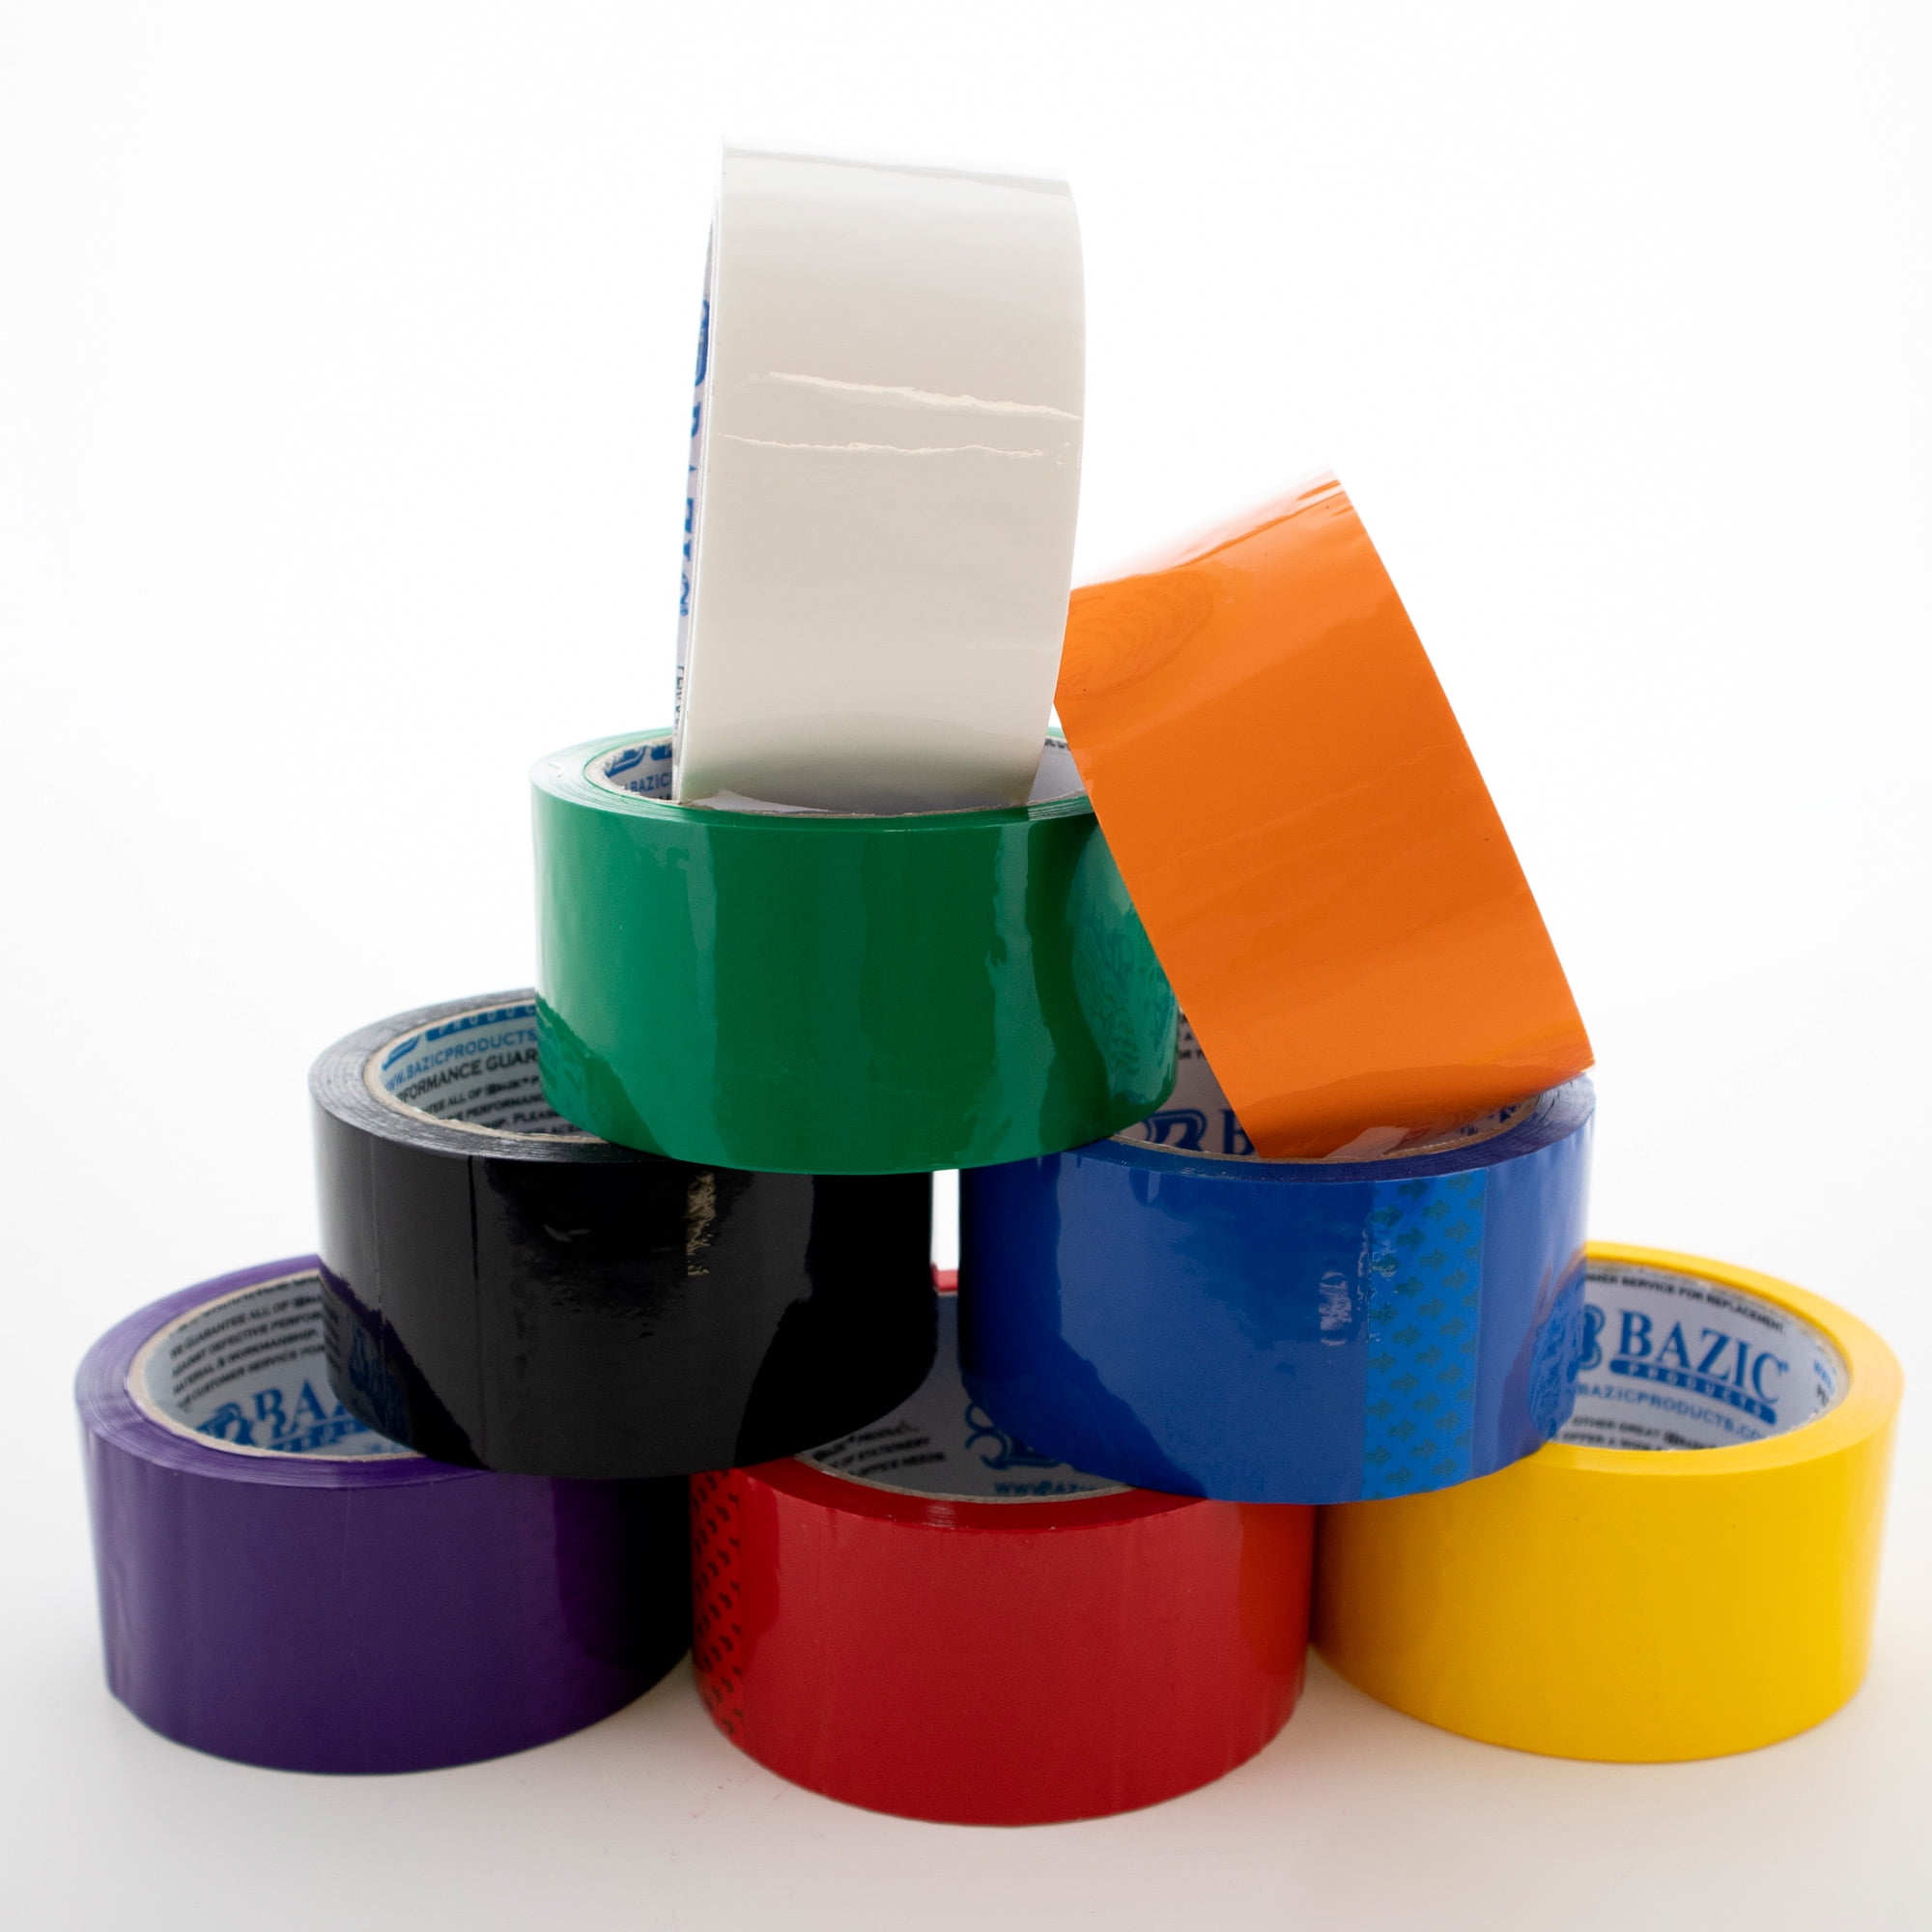 BAZIC Colored Duct Tape 1.88 X 54.6 Yards,Packing Tapes for Decoration  Sealing Packing Box, Projects Repairs Crafts, 8-Pack